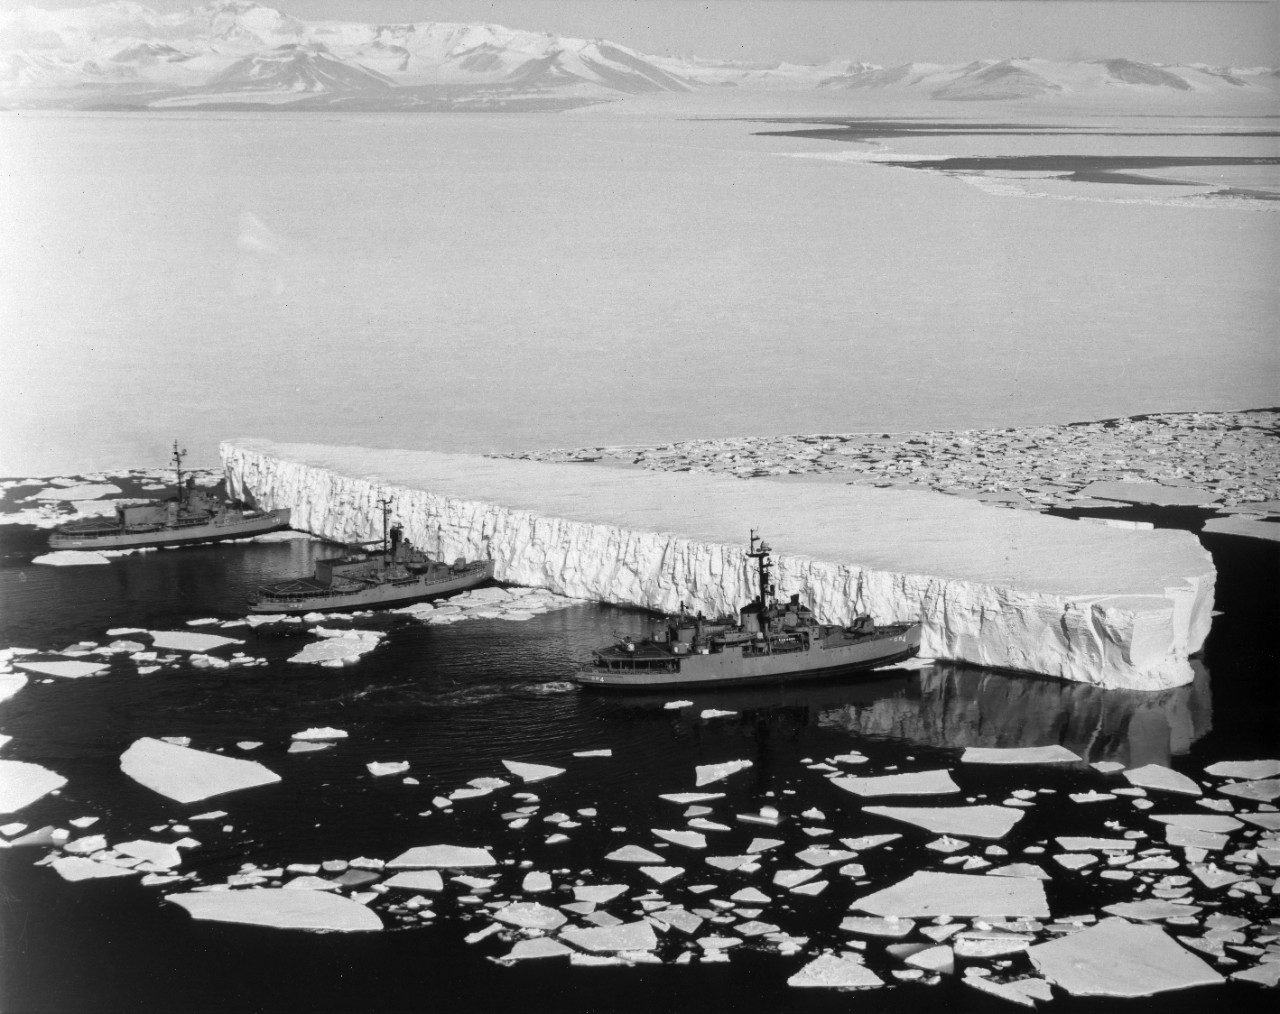 U.S. Navy Icebreakers (L-R) USS Burton Island (AGB-1), USS Atka (AGB-3), and USS Glacier (AGB-4) push together to move a huge iceberg from the channel to McMurdo Station, Antarctica.